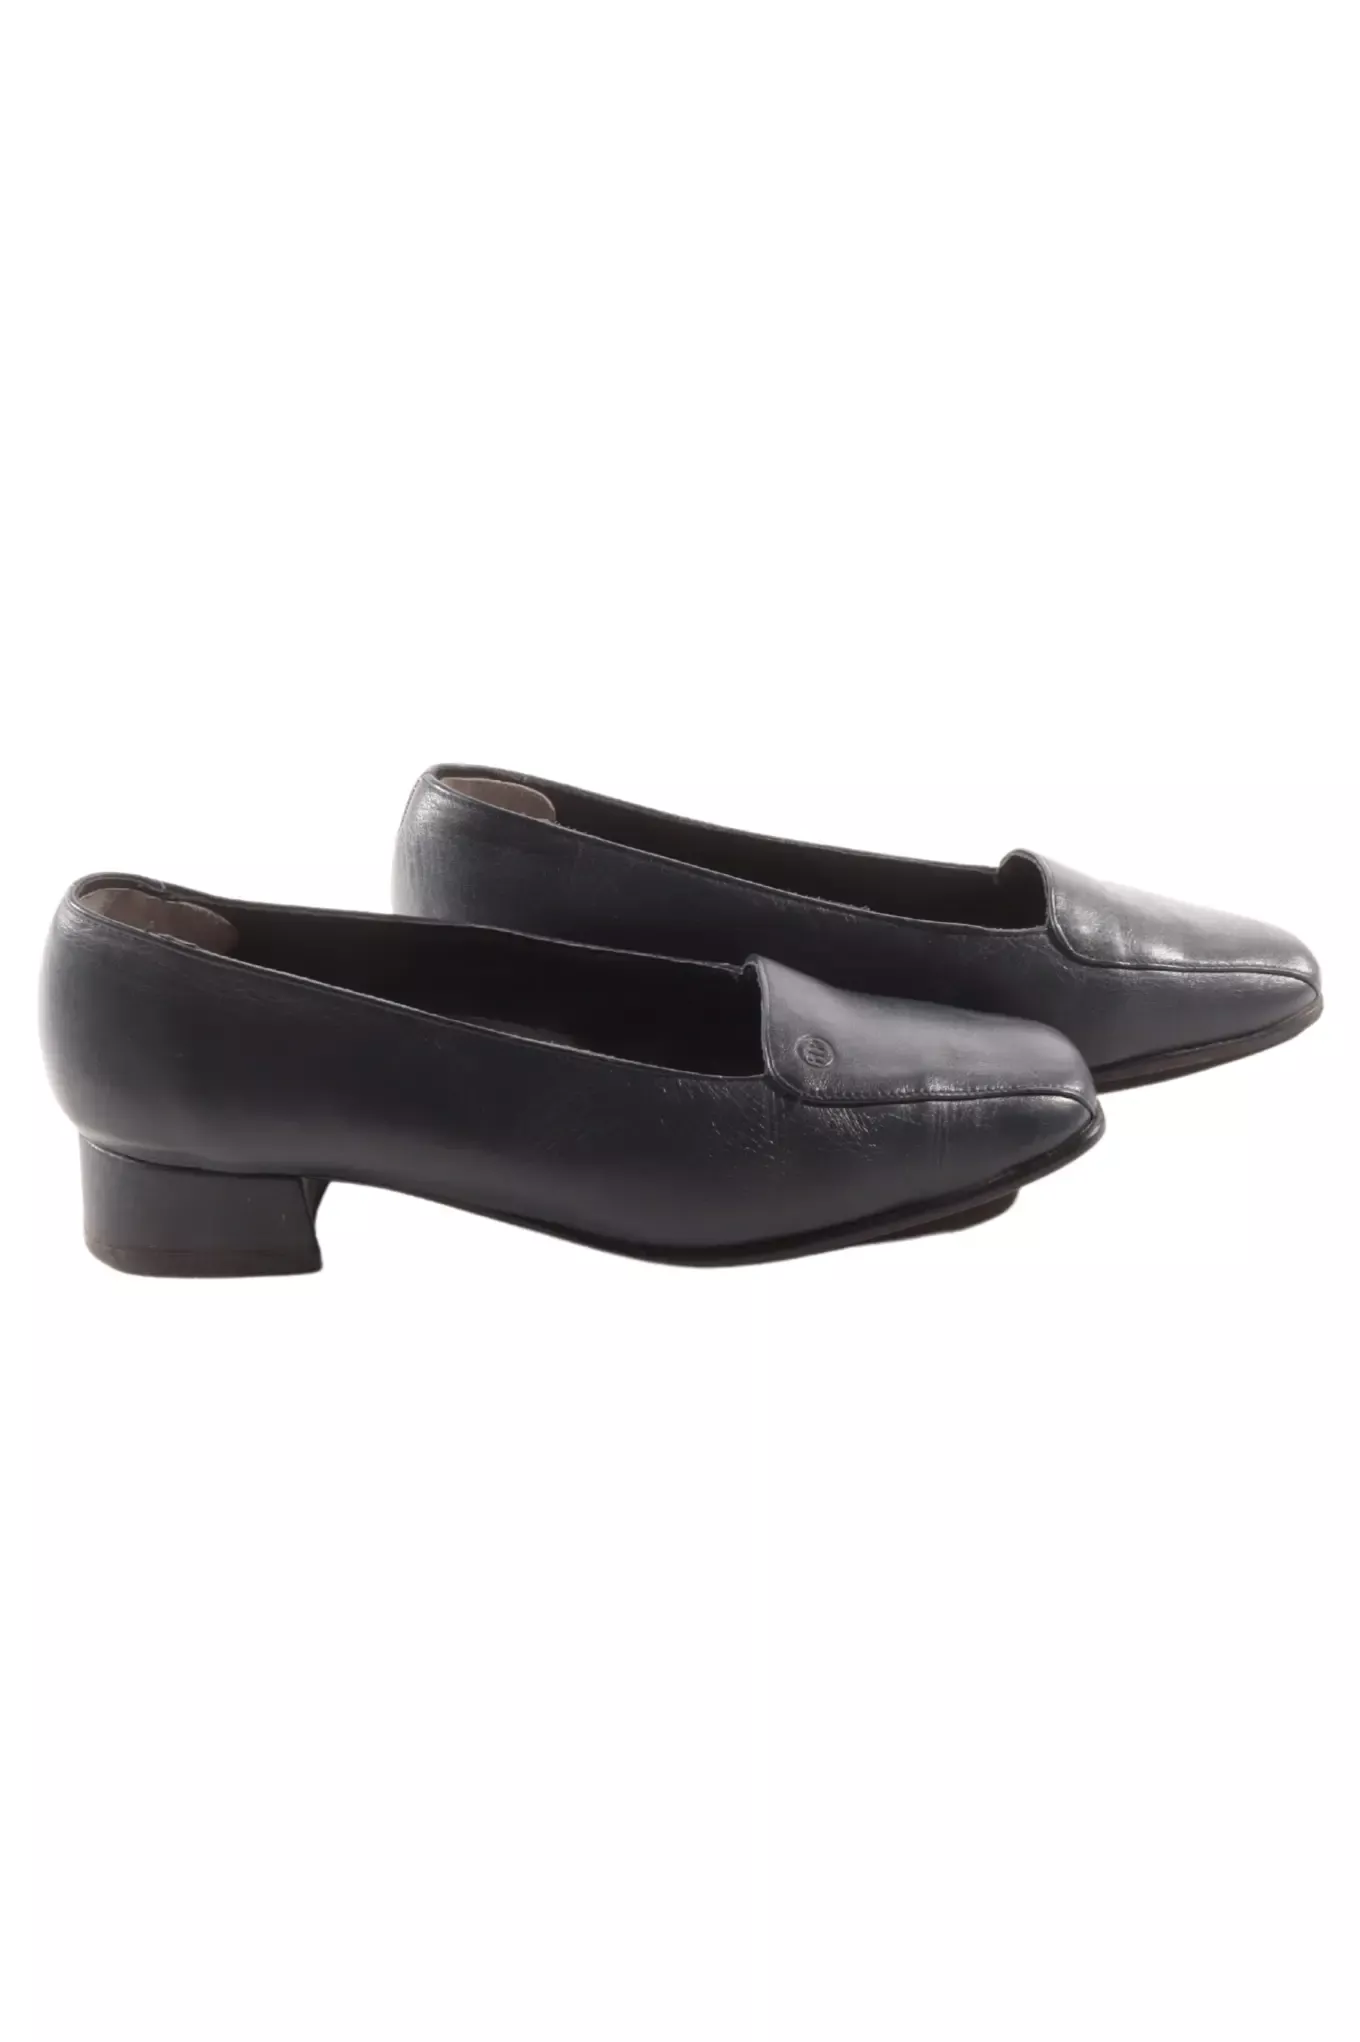 Hush Puppy Shoes An Elegant Blend Of
Style And Casaulty